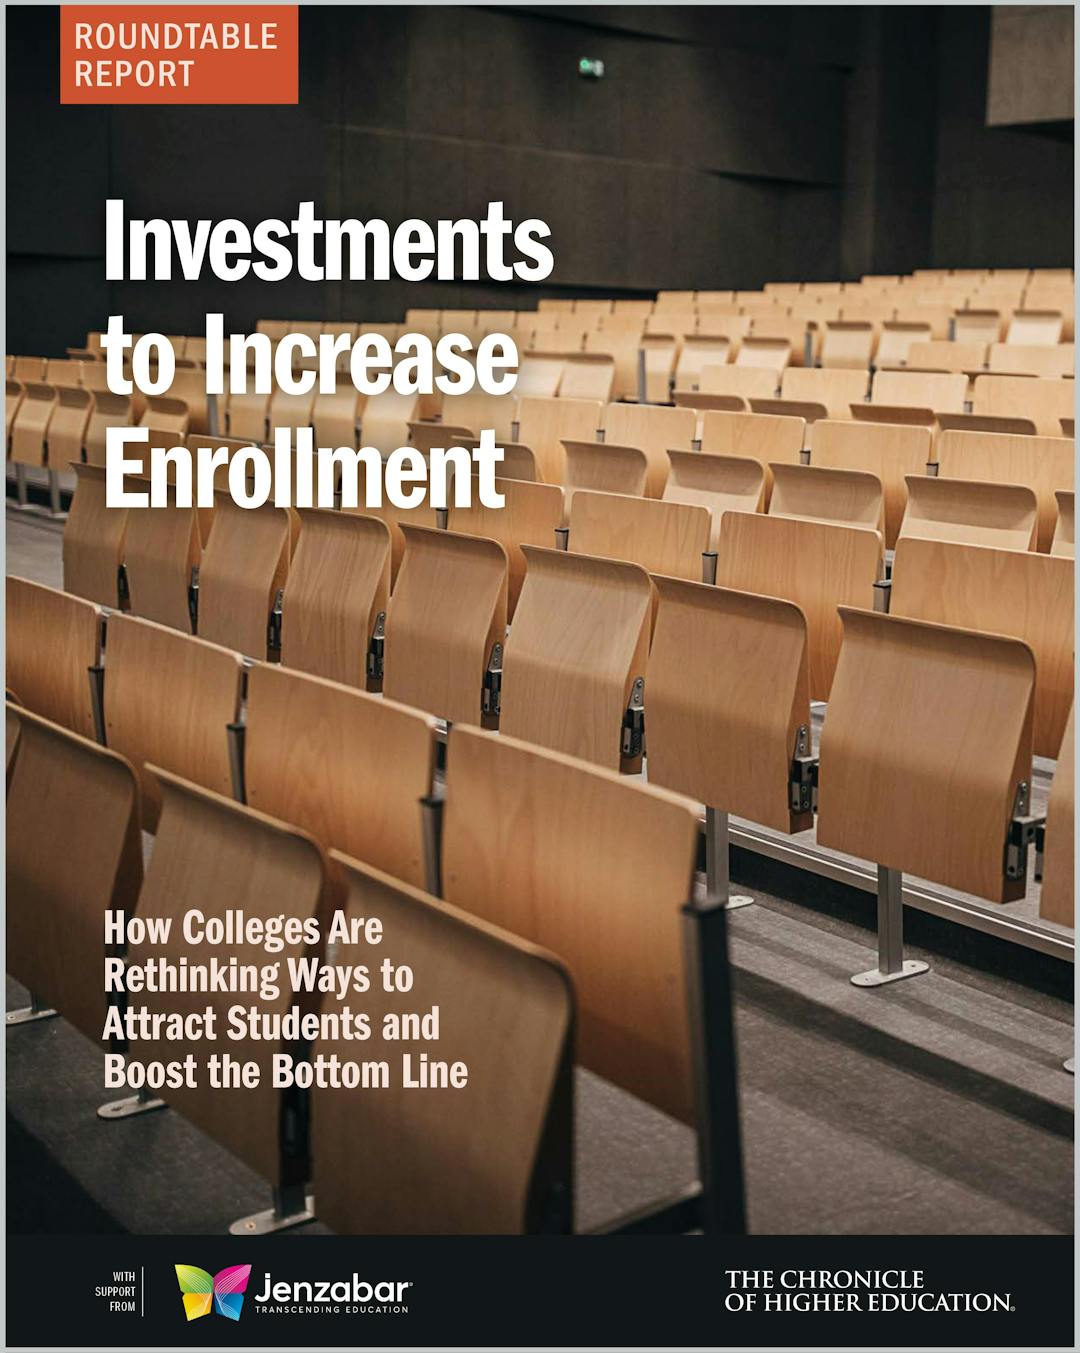 Investments to Increase Enrollment: How Colleges Are Rethinking Ways to Attract Students and Boost the Bottom Line